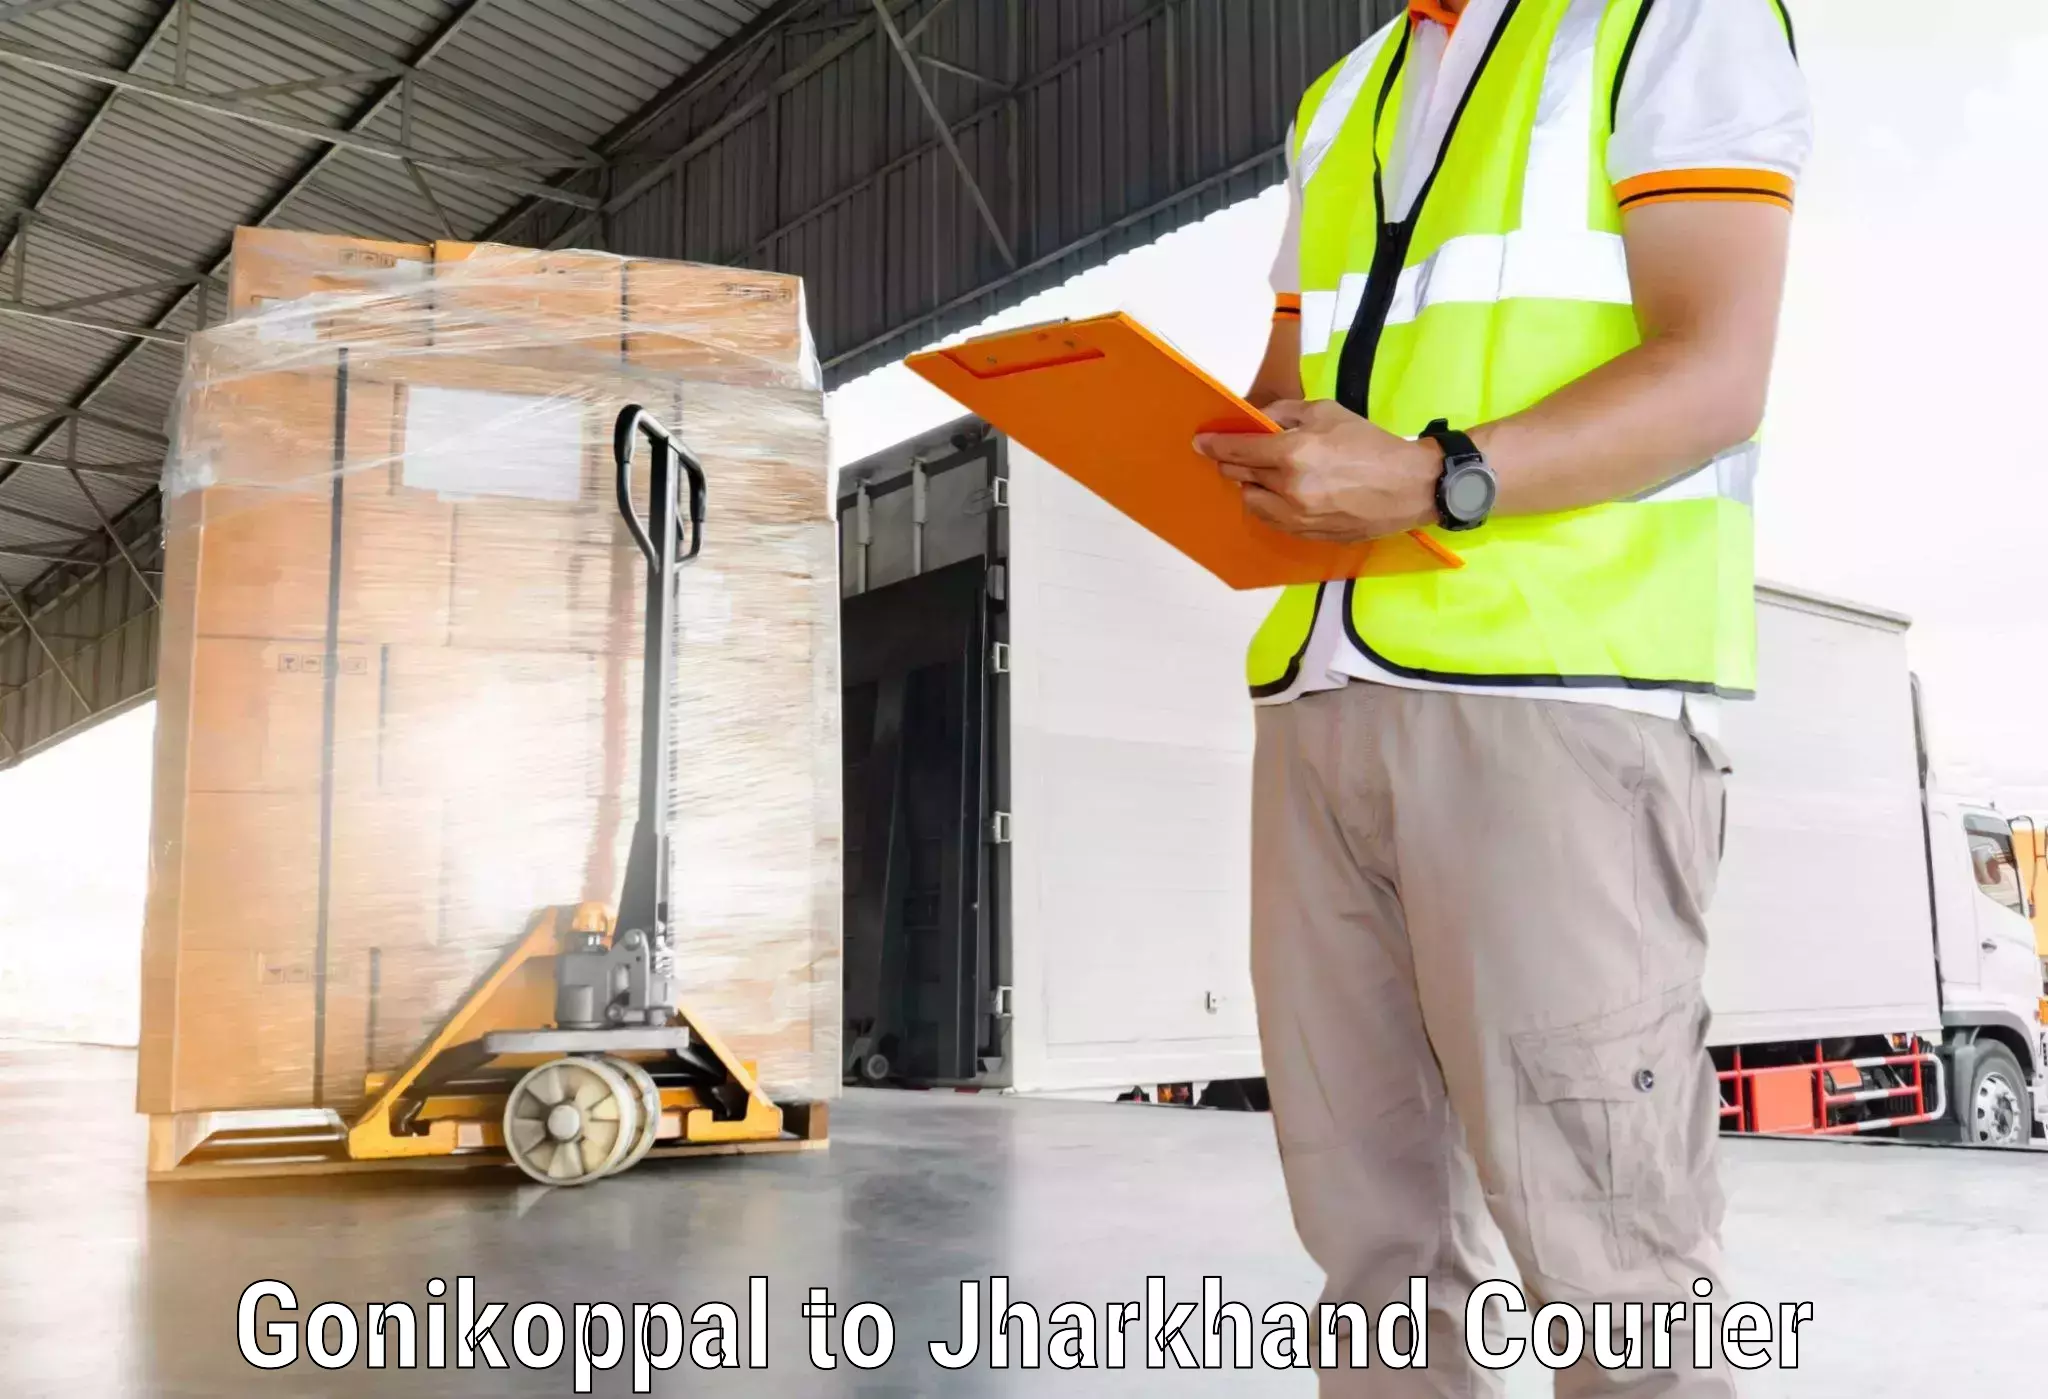 Easy access courier services Gonikoppal to Chakuliya